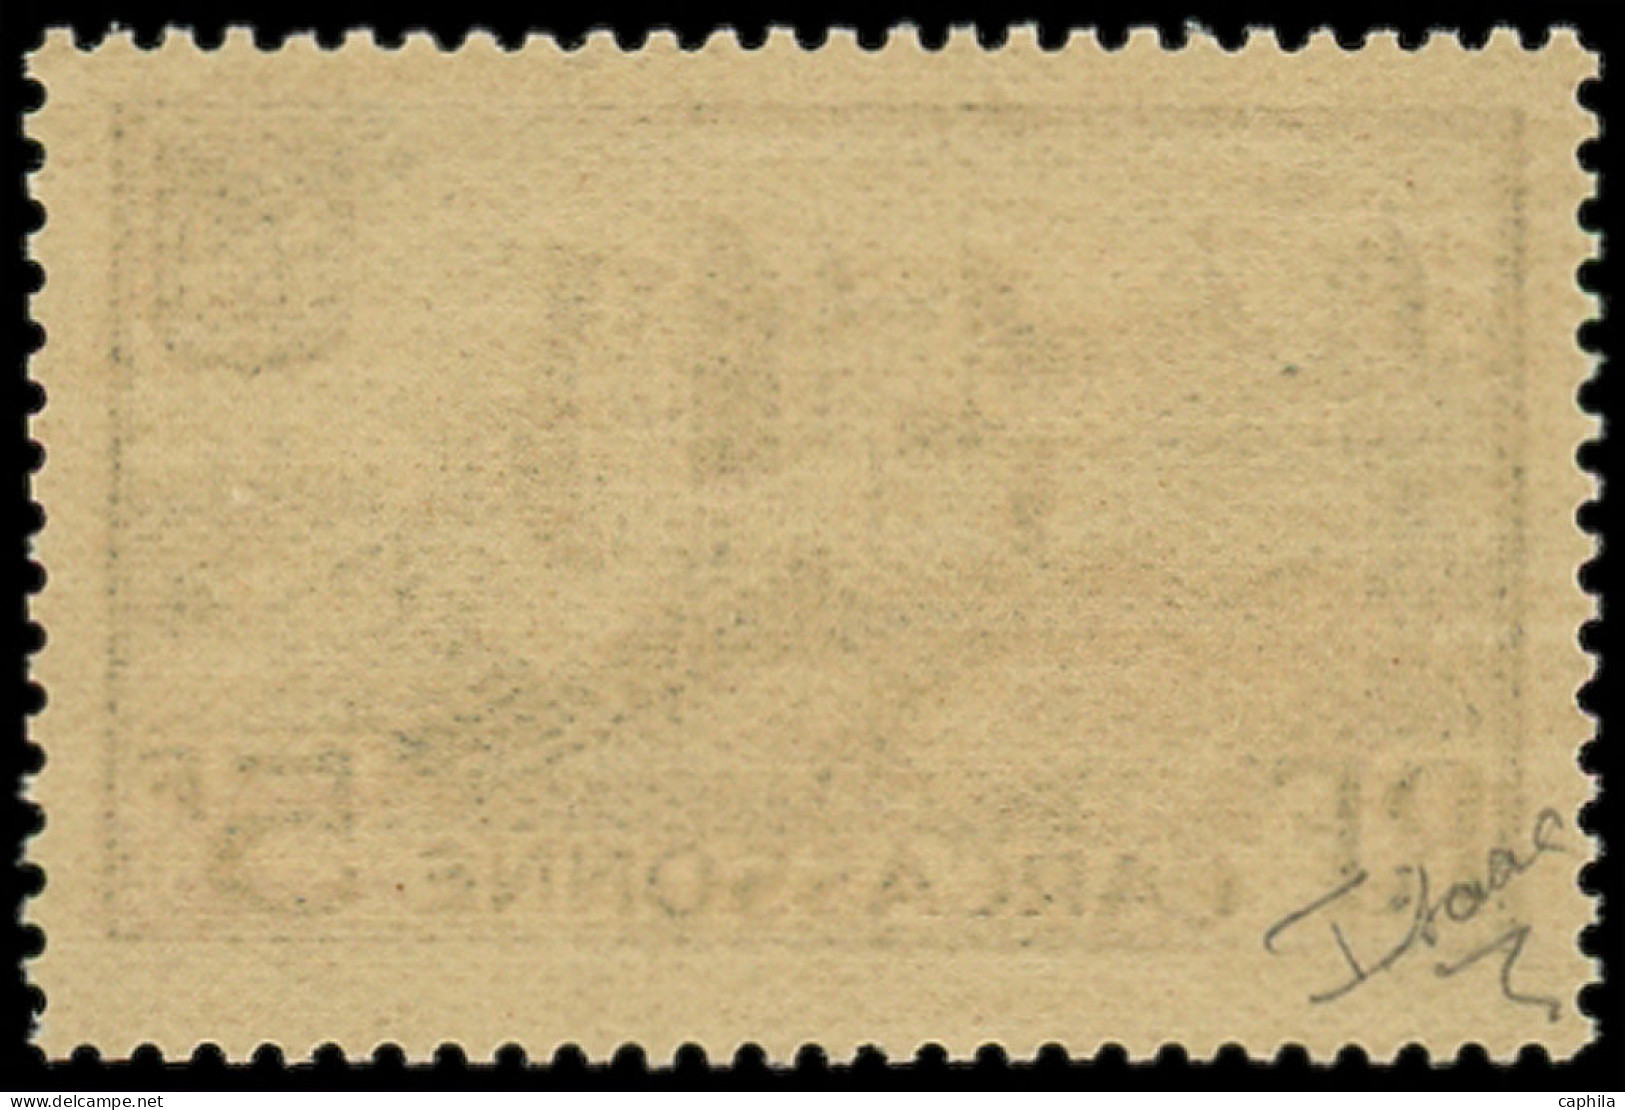 ** FRANCE - Poste - 490a, Double Surcharge, Signé Isaac: 2.50f. Sur 5f. Carcassonne - Unused Stamps